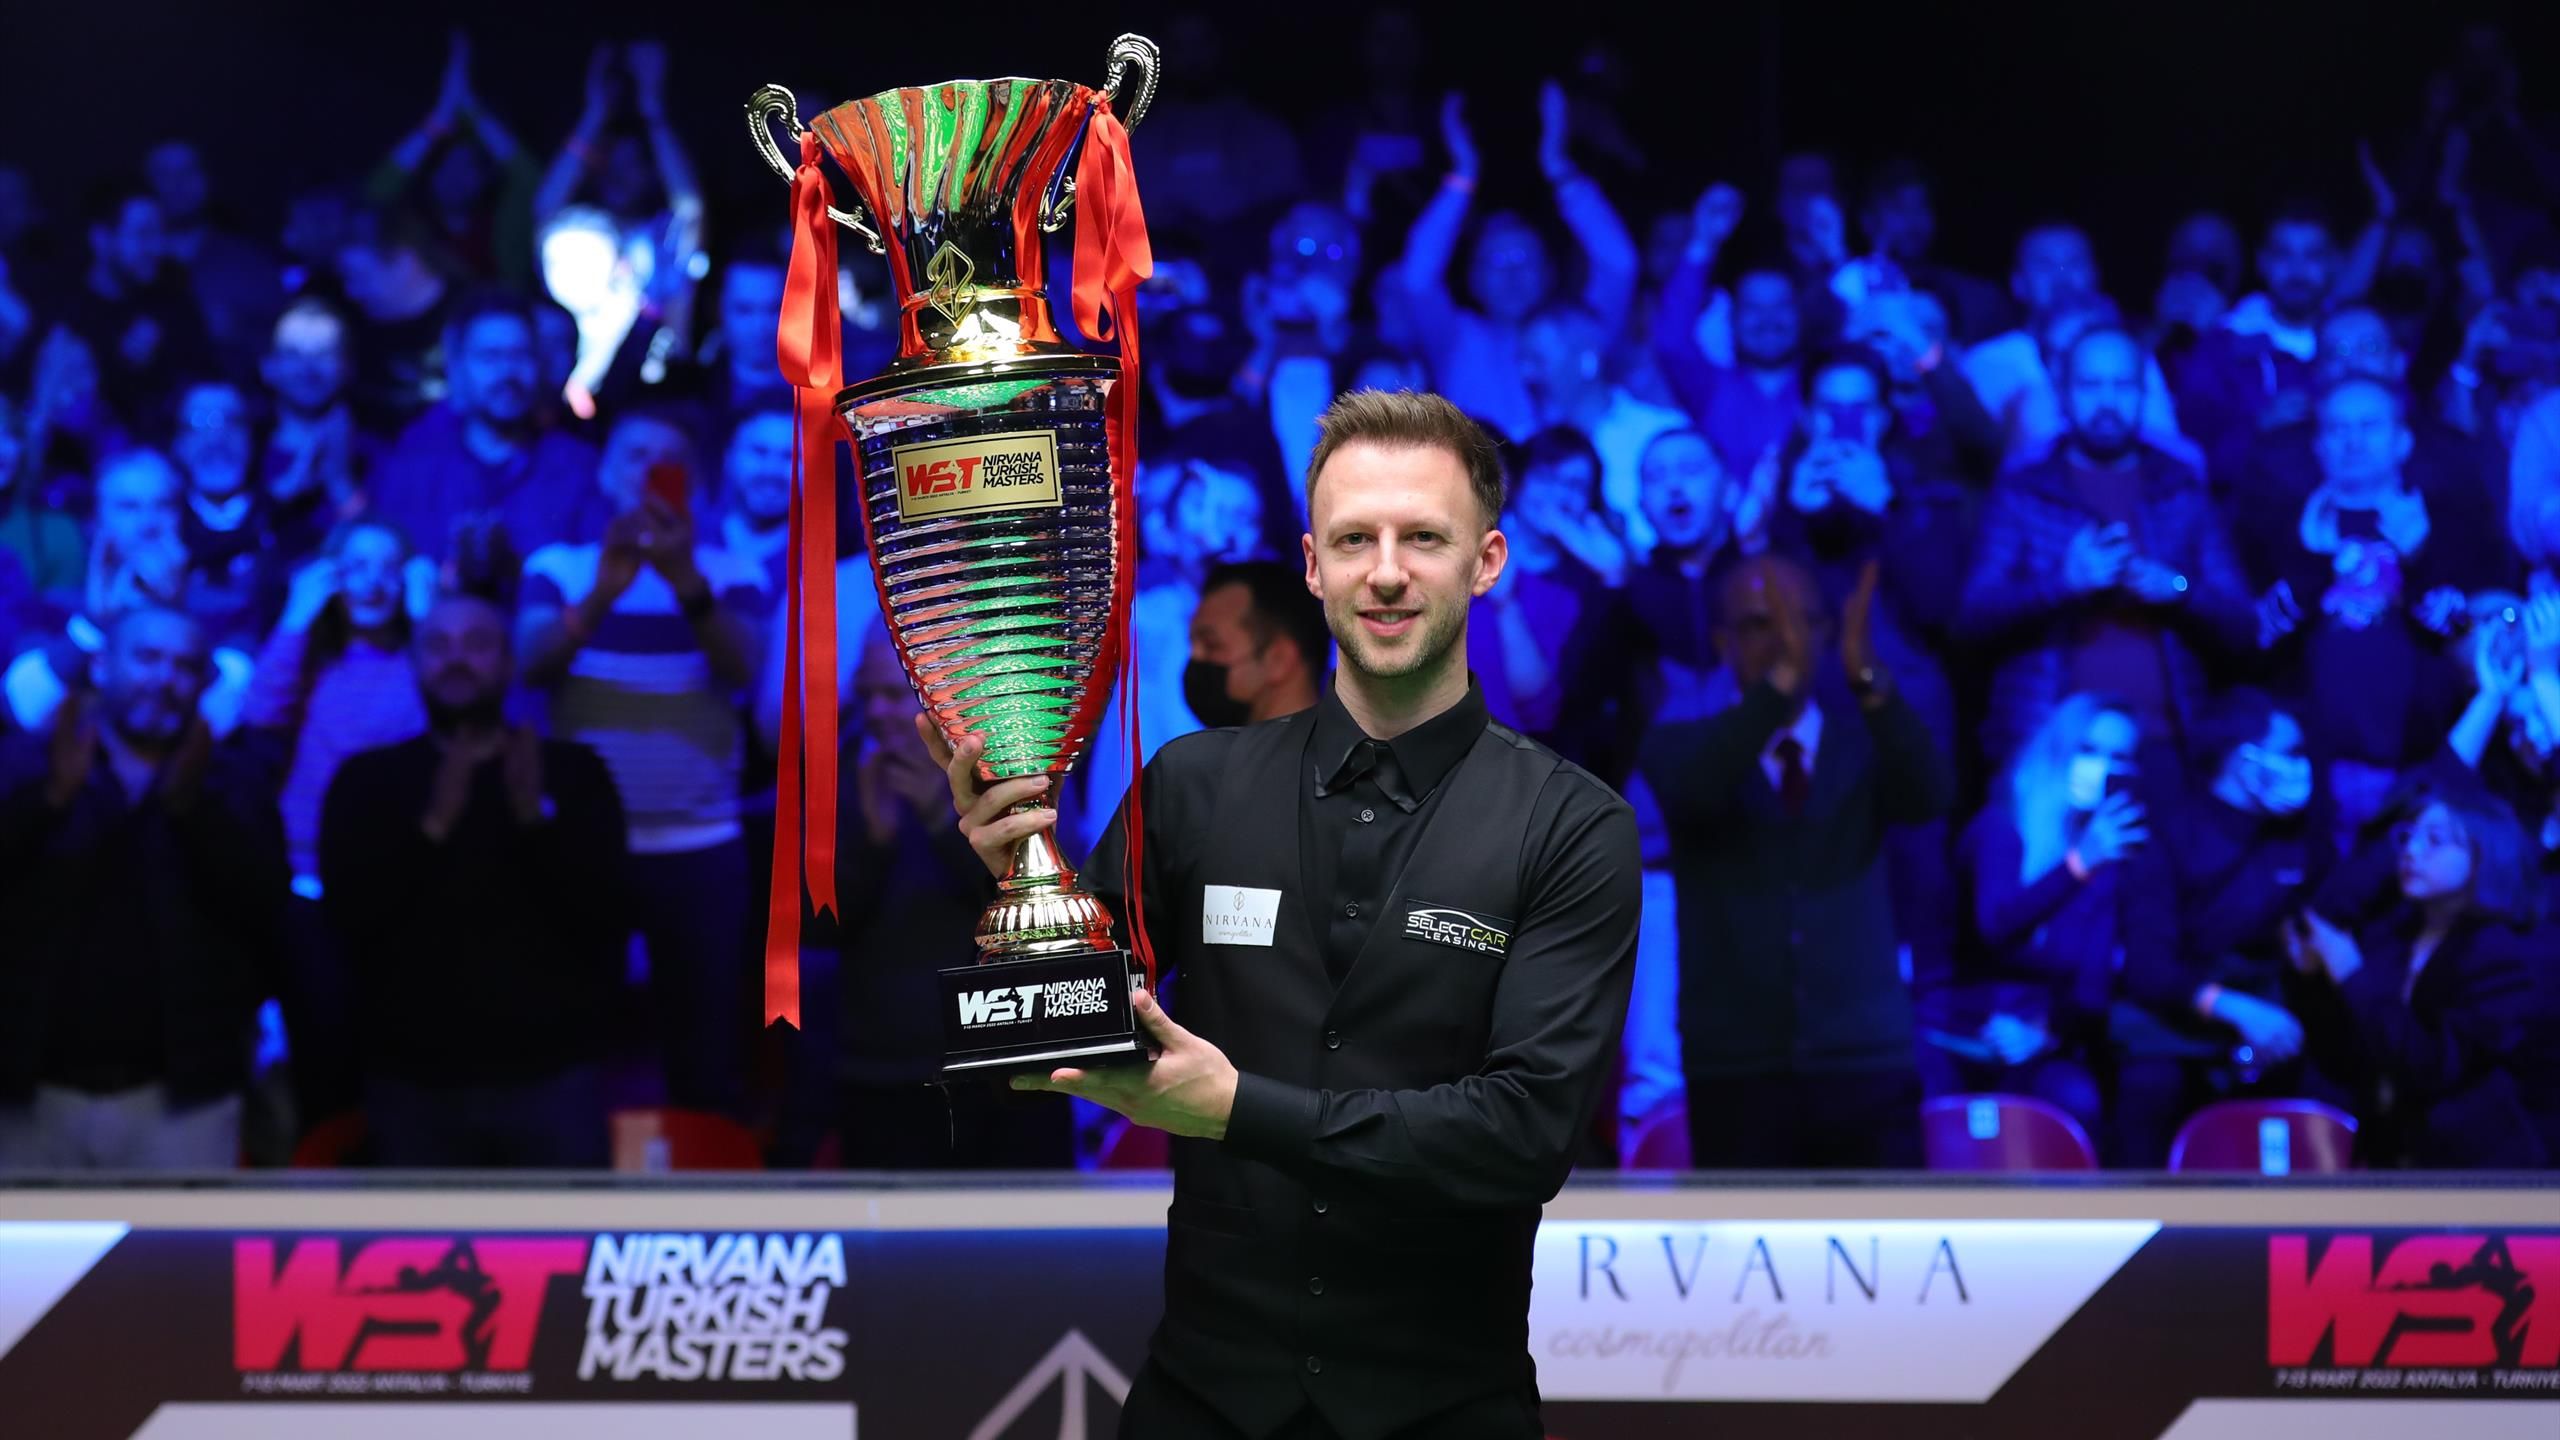 Turkish Masters cancelled, World Snooker Tour exploring all options to find alternate event